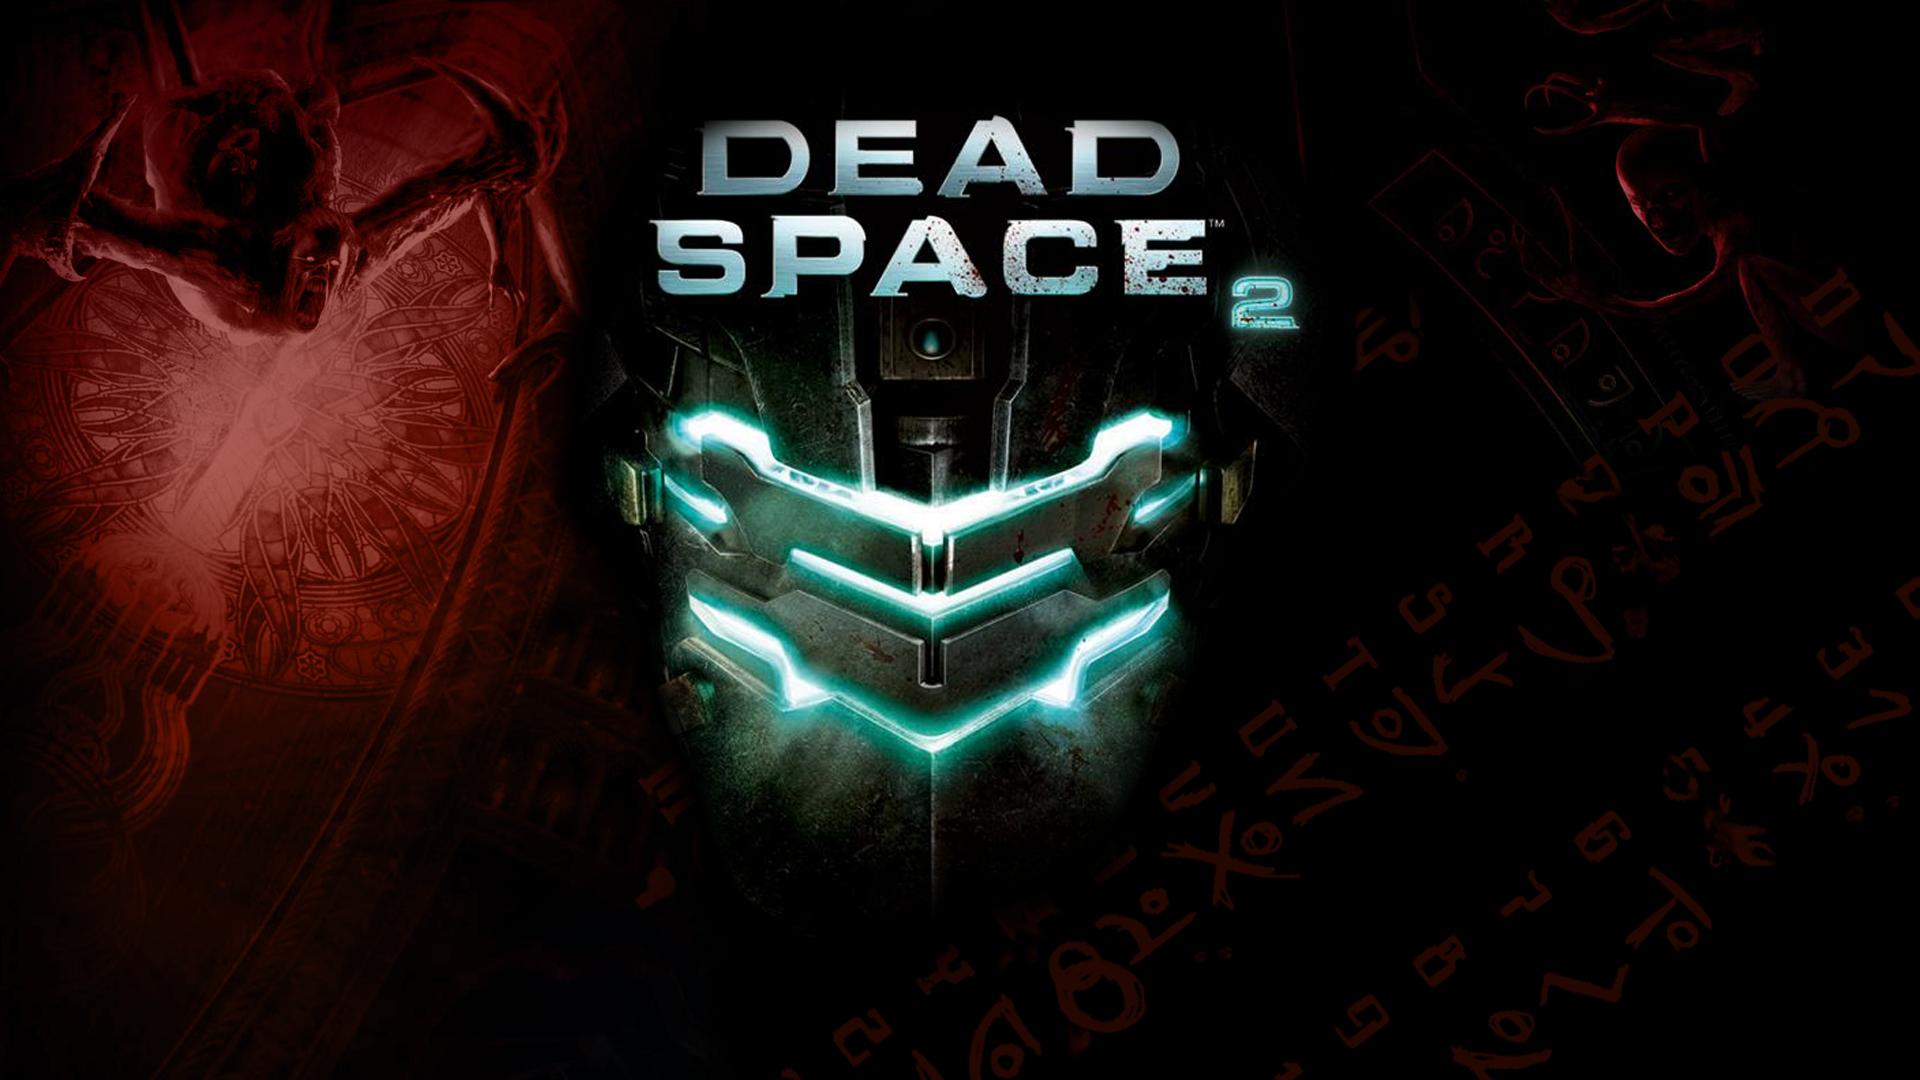 Dead space 2 game wallpaper hd free download games picture View HD